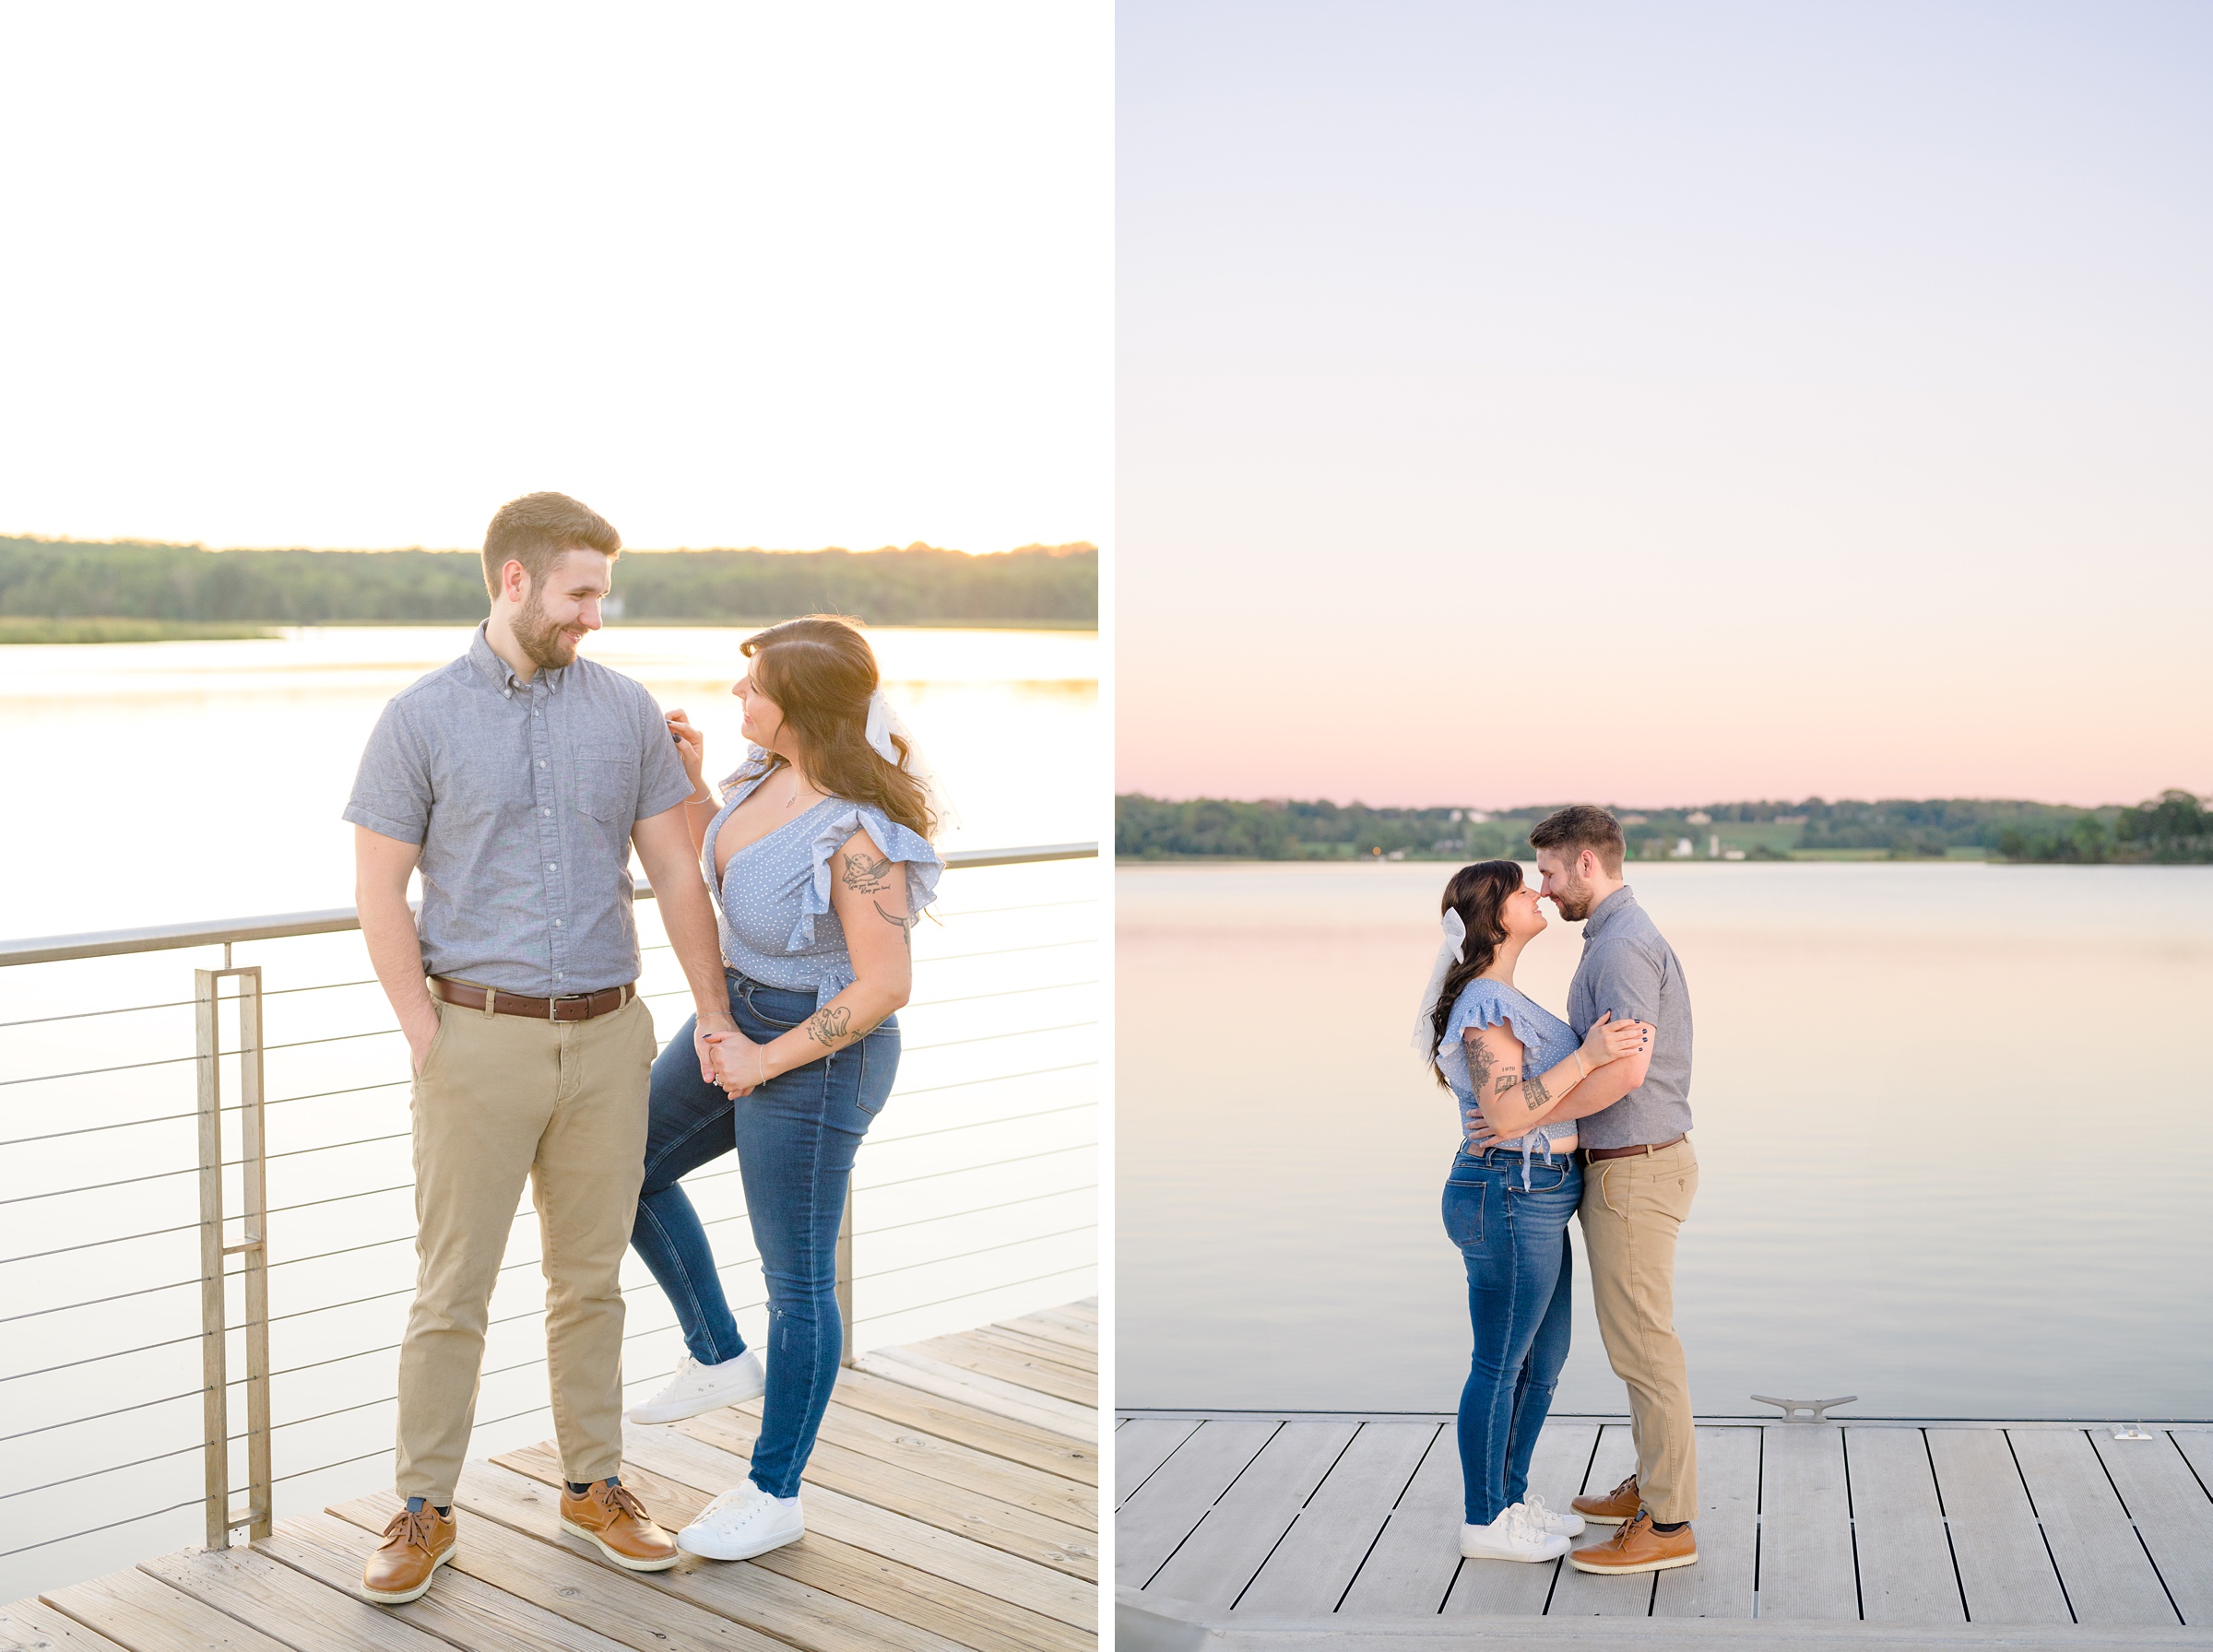 Engagement session in Southern Maryland photographed by Baltimore Wedding Photographer Cait Kramer.